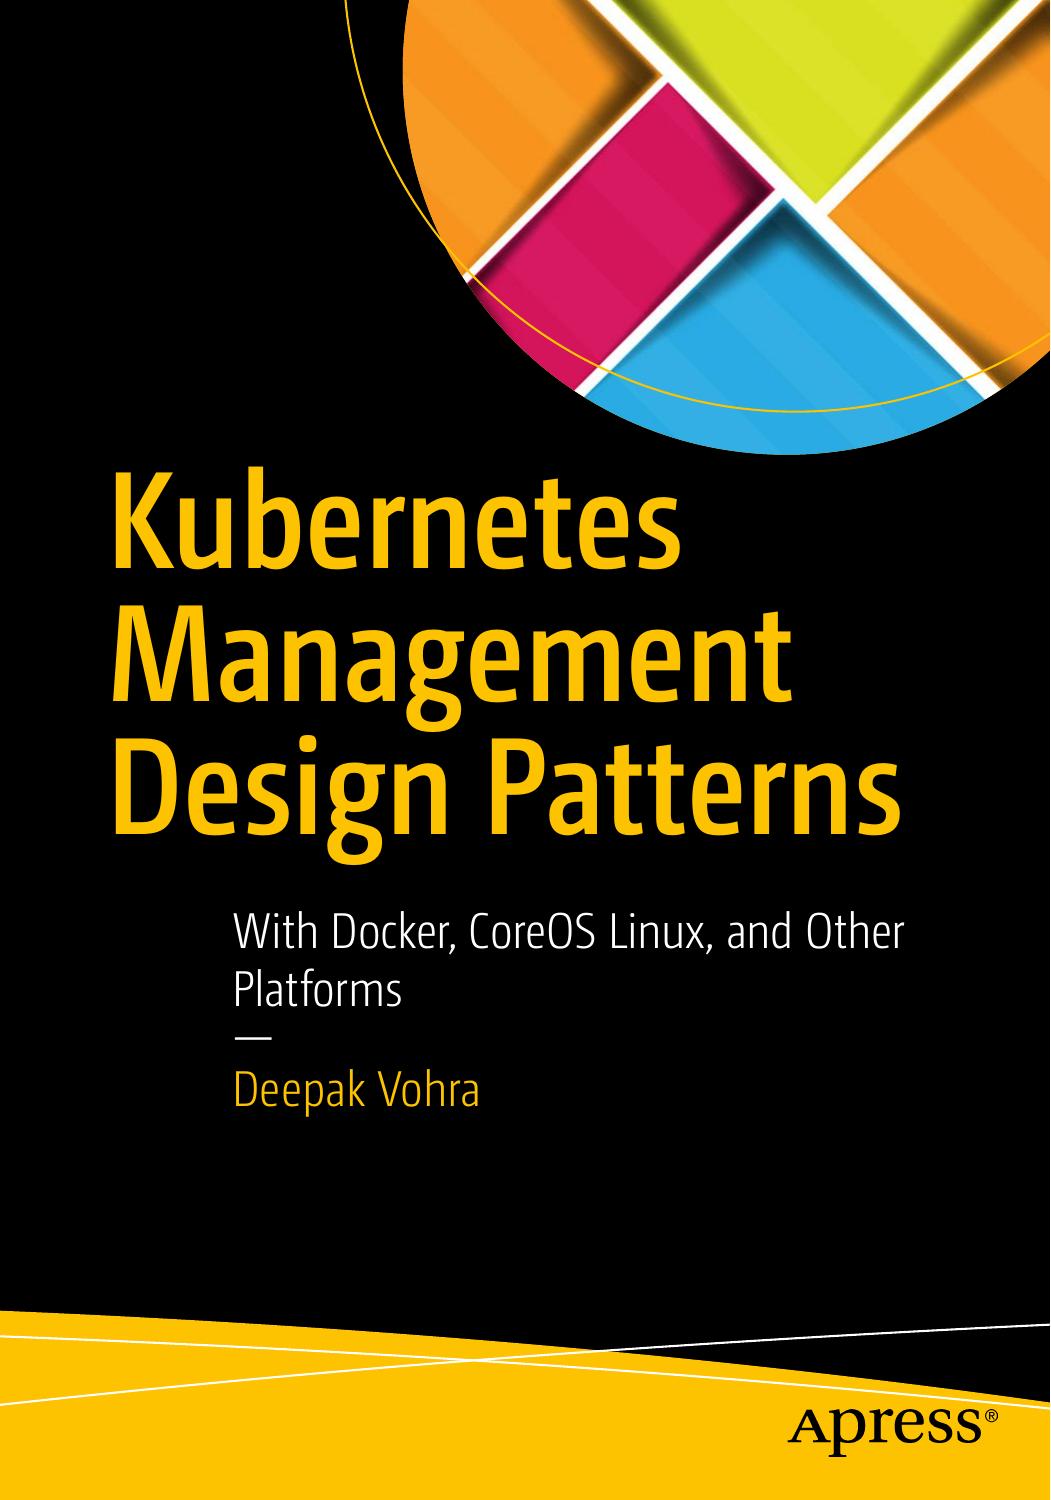 Kubernetes Management Design Patterns With Docker, CoreOS Linux, and Other Platforms 2017